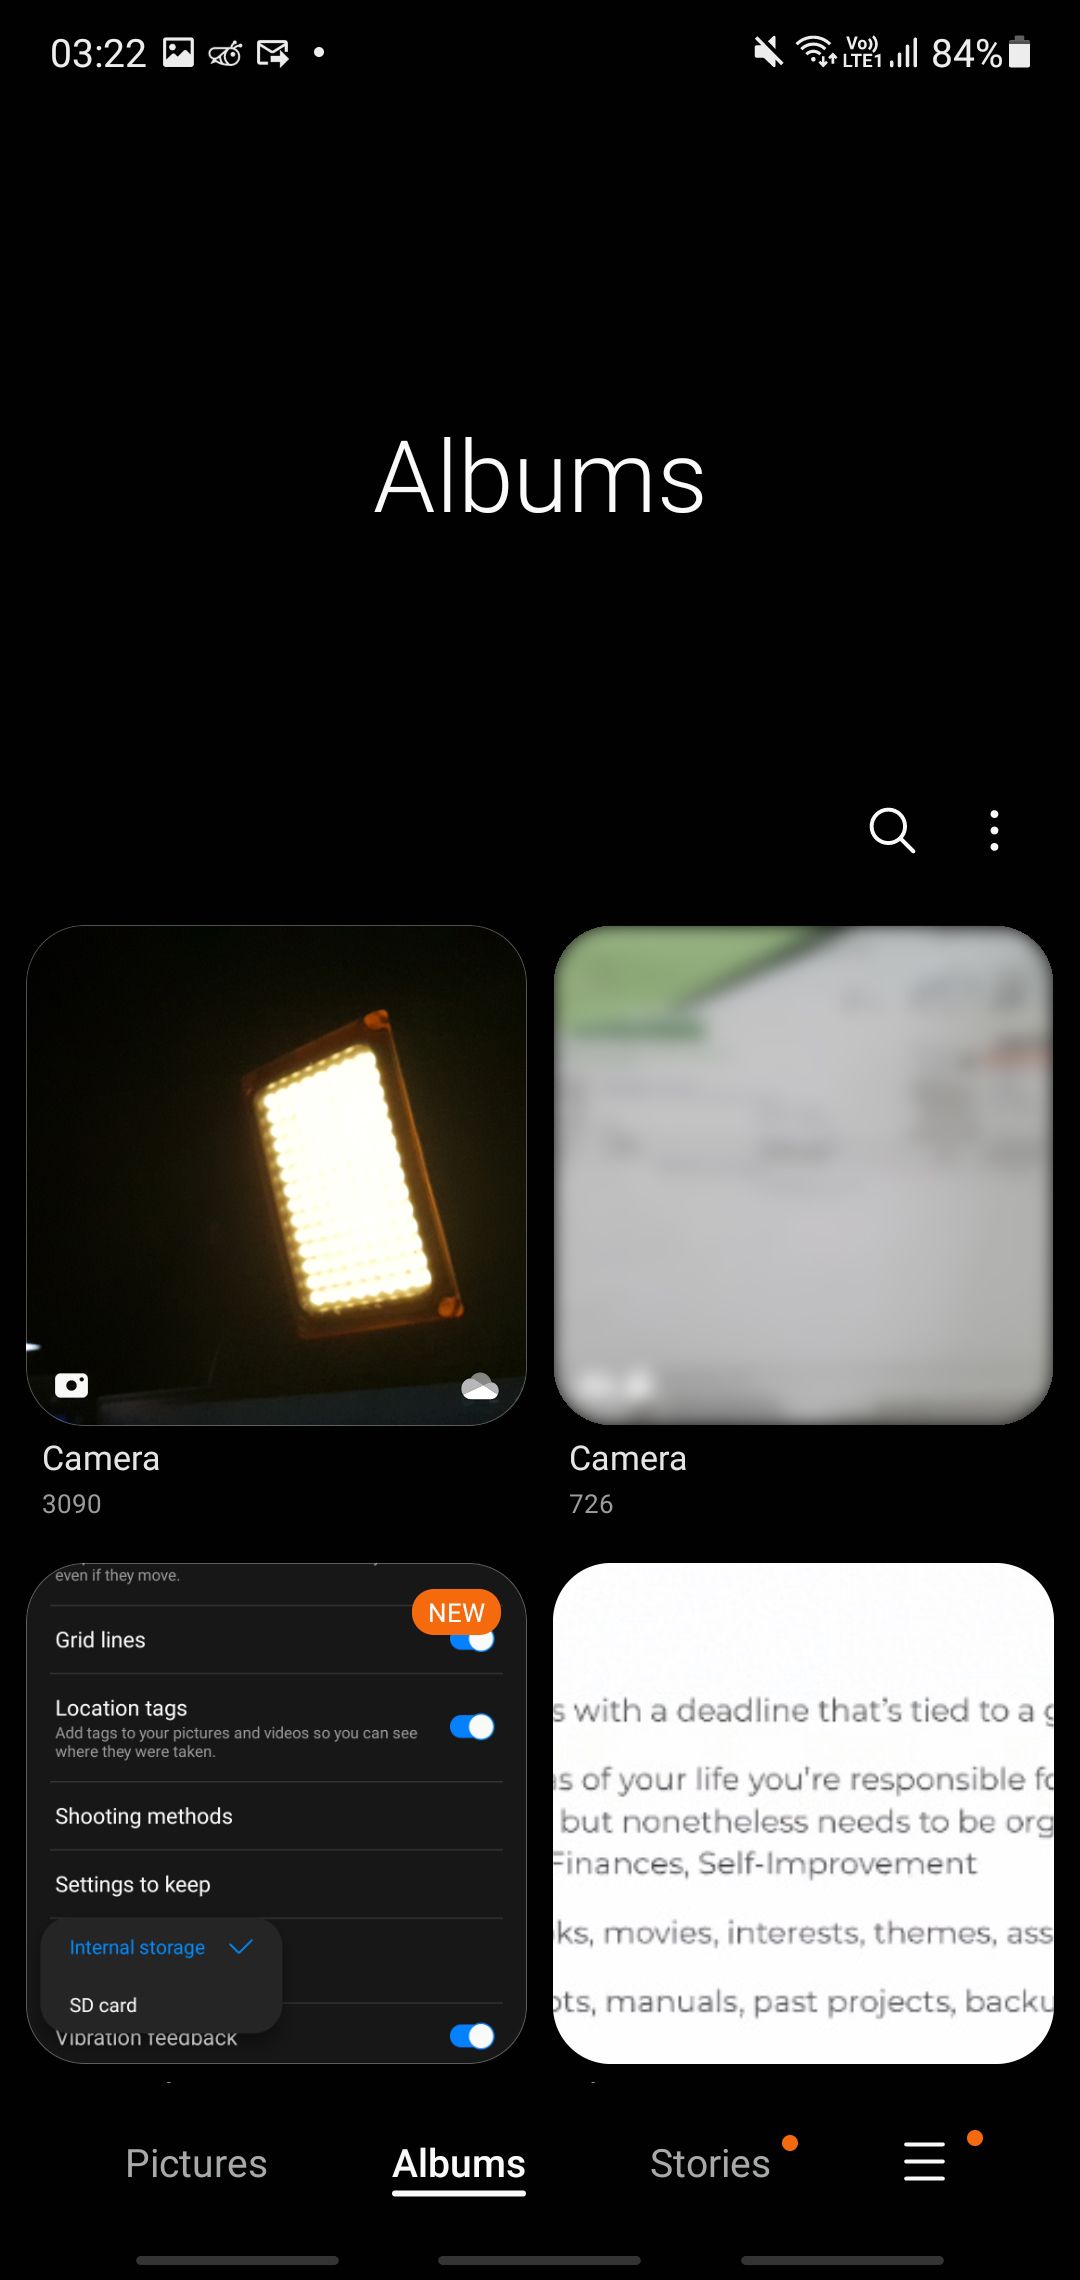 Viewing albums and images in the Samsung Galaxy Gallery app